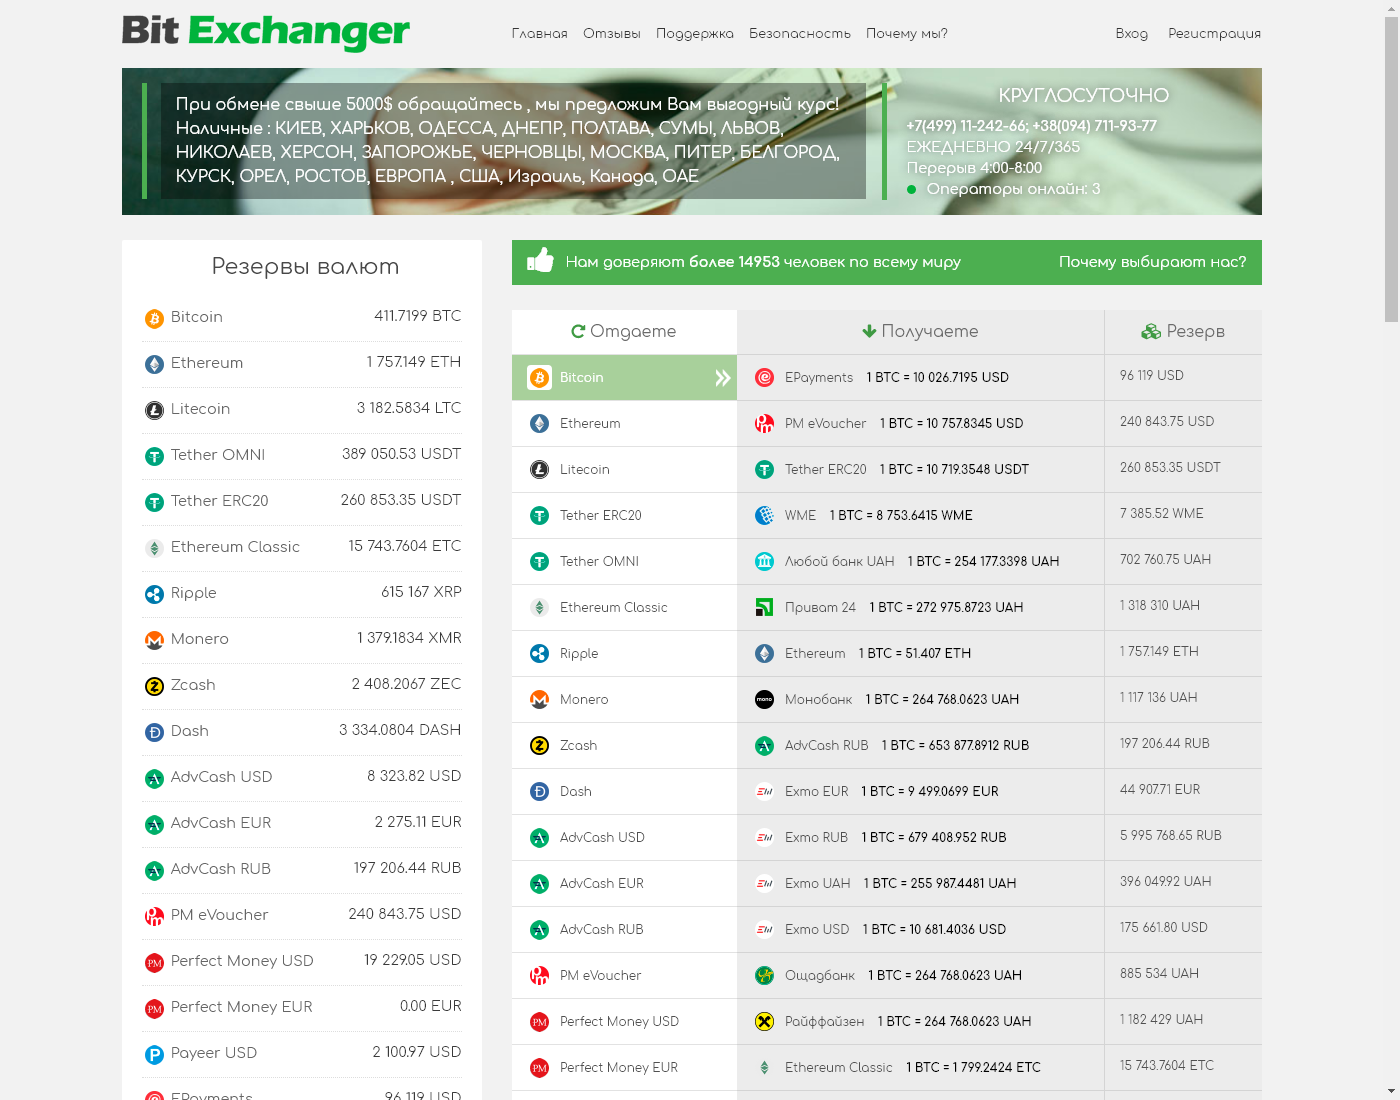 BitExchanger user interface: the home page in English